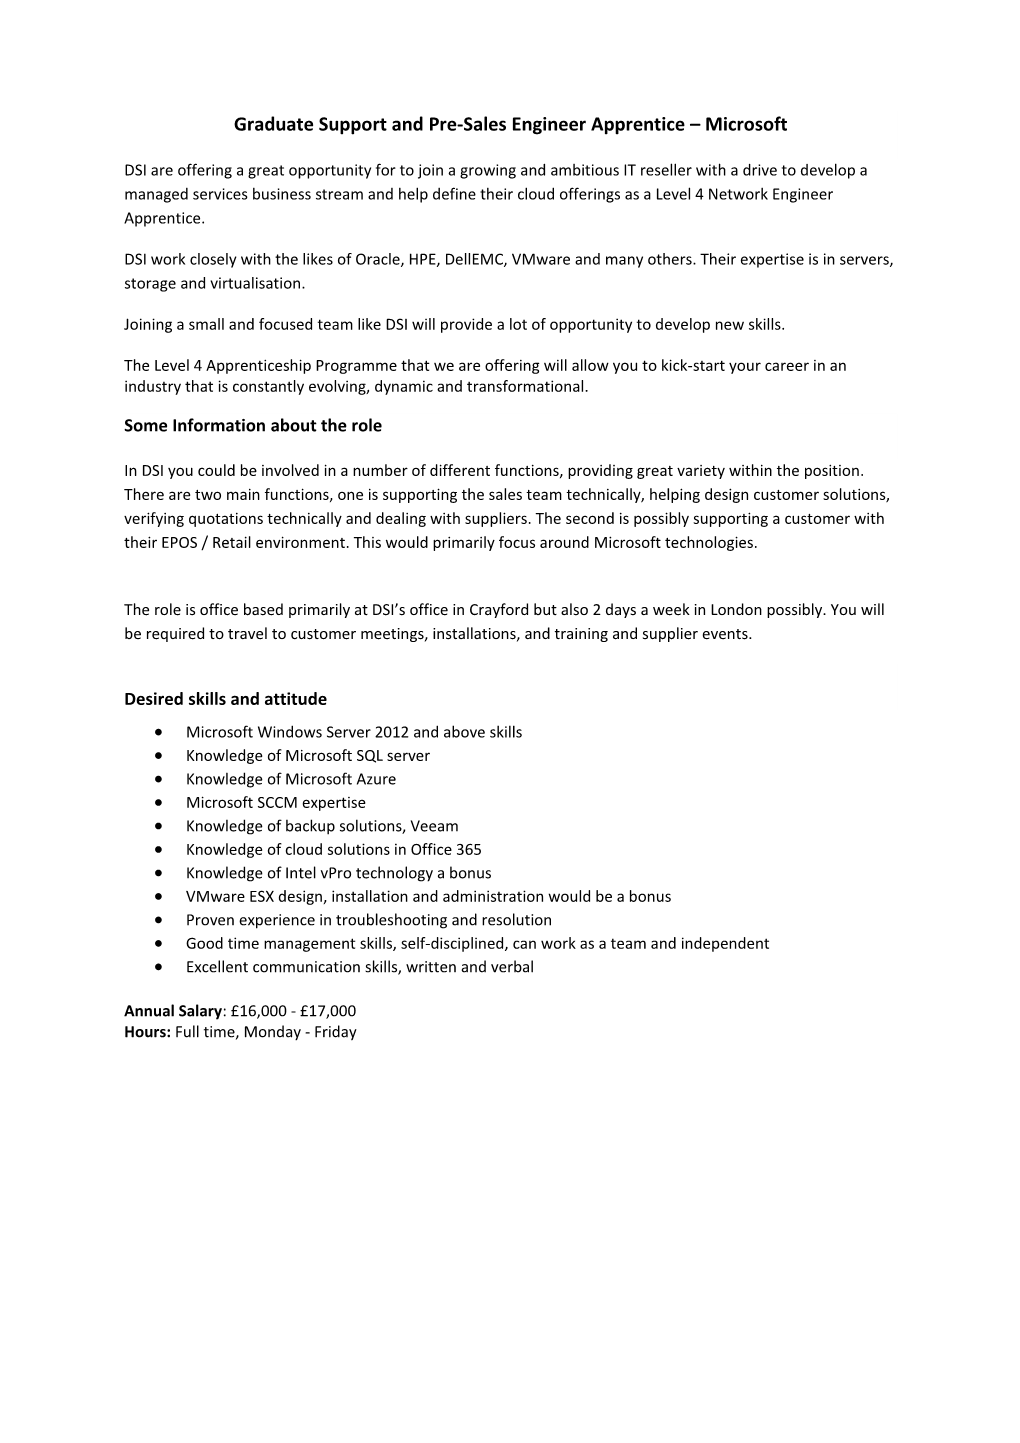 Graduate Support and Pre-Sales Engineer Apprentice Microsoft